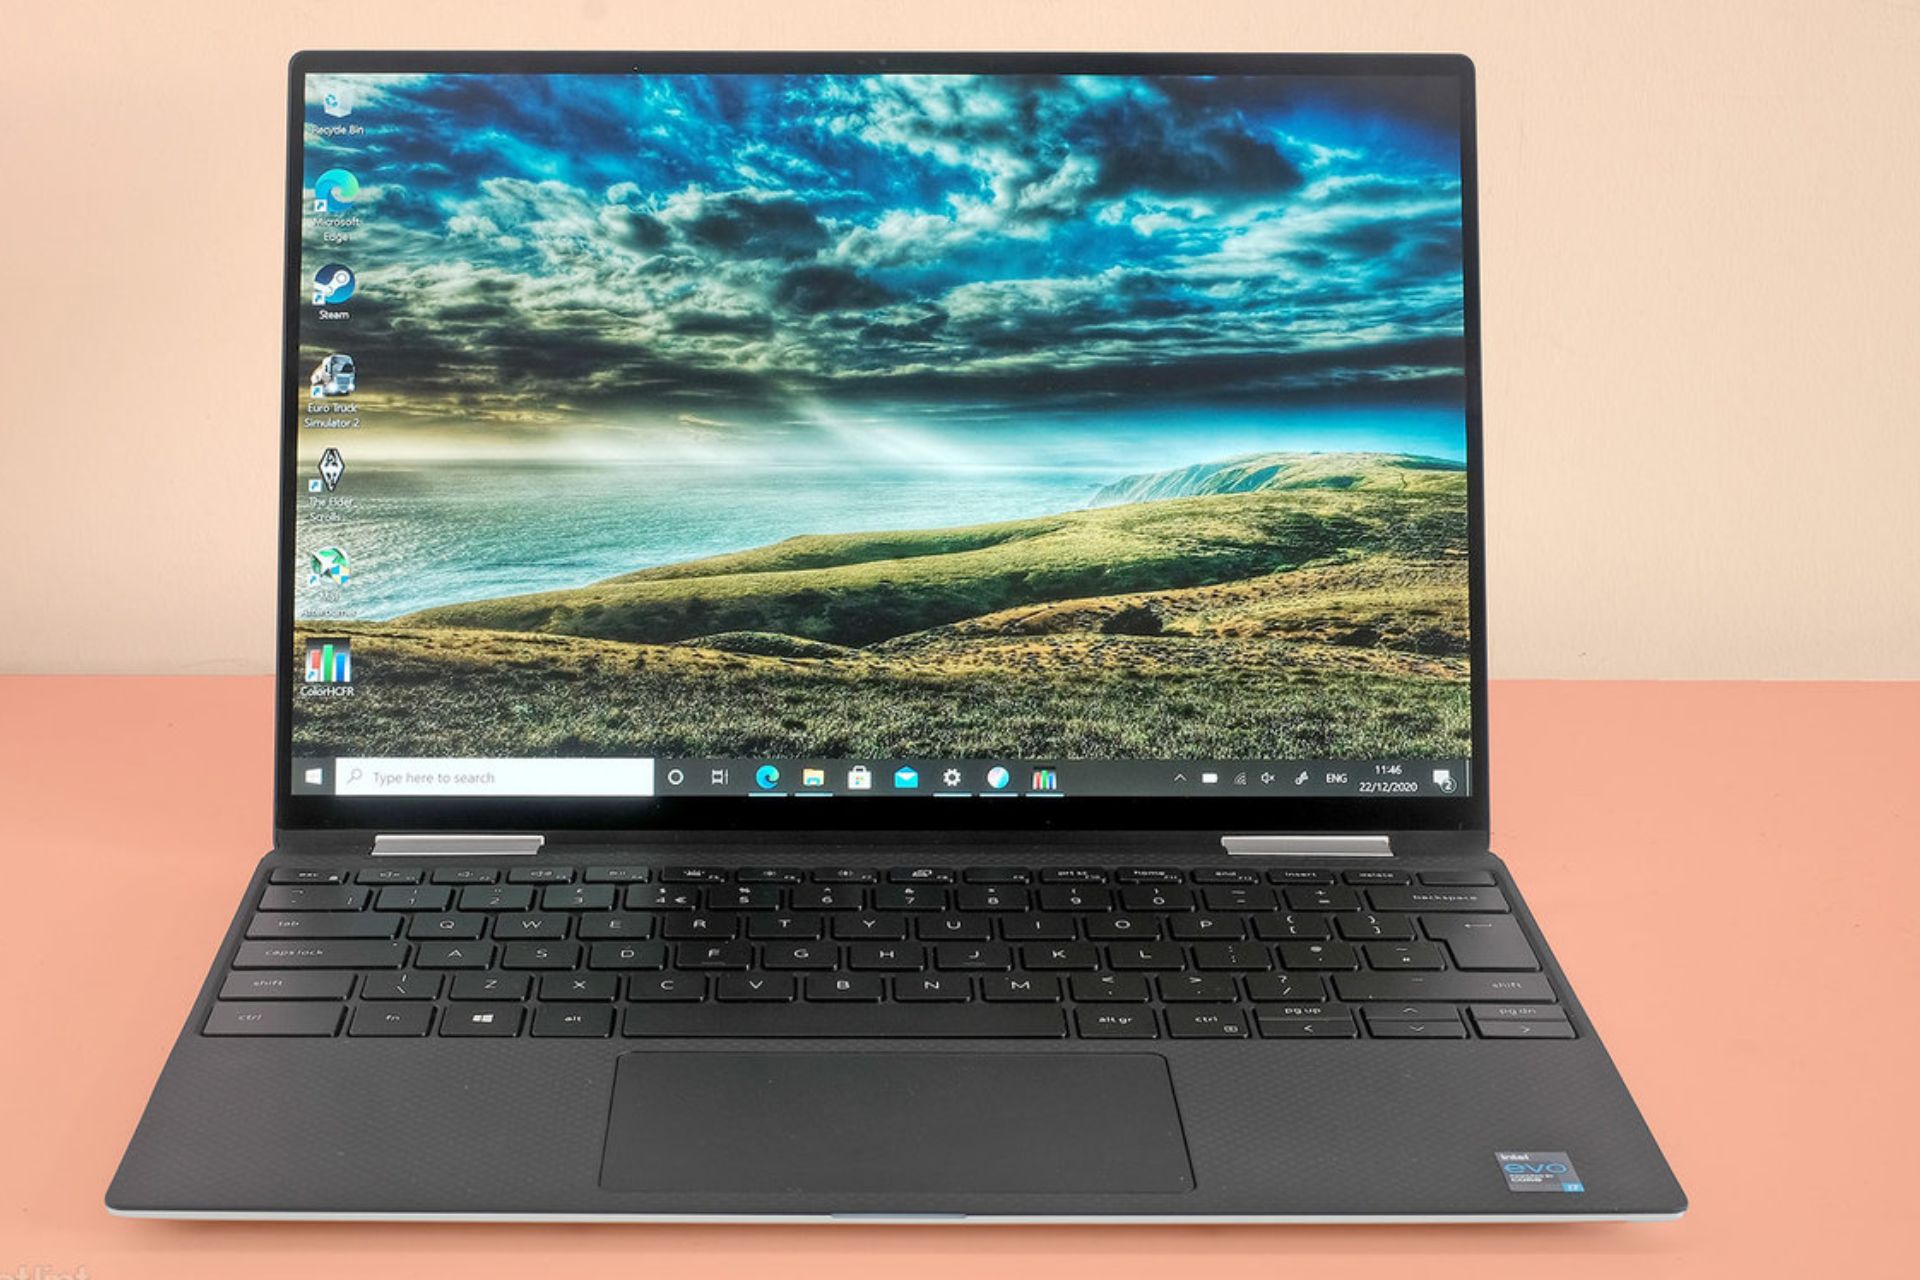 7 Ways to Fix Your Dell XPS 13 when It's Not Booting Up